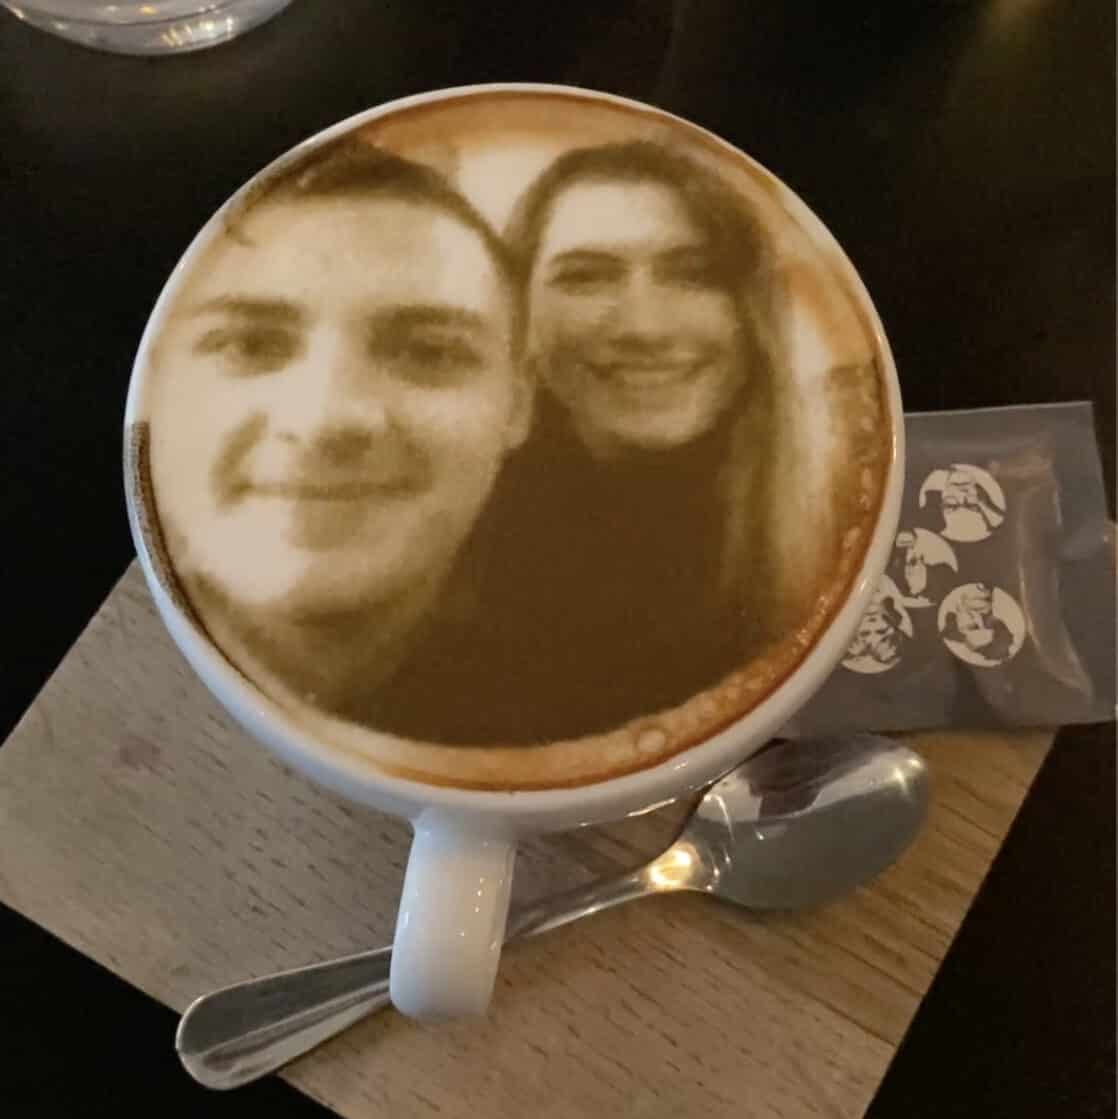 selfie of romantic couple printed onto a cappuccino